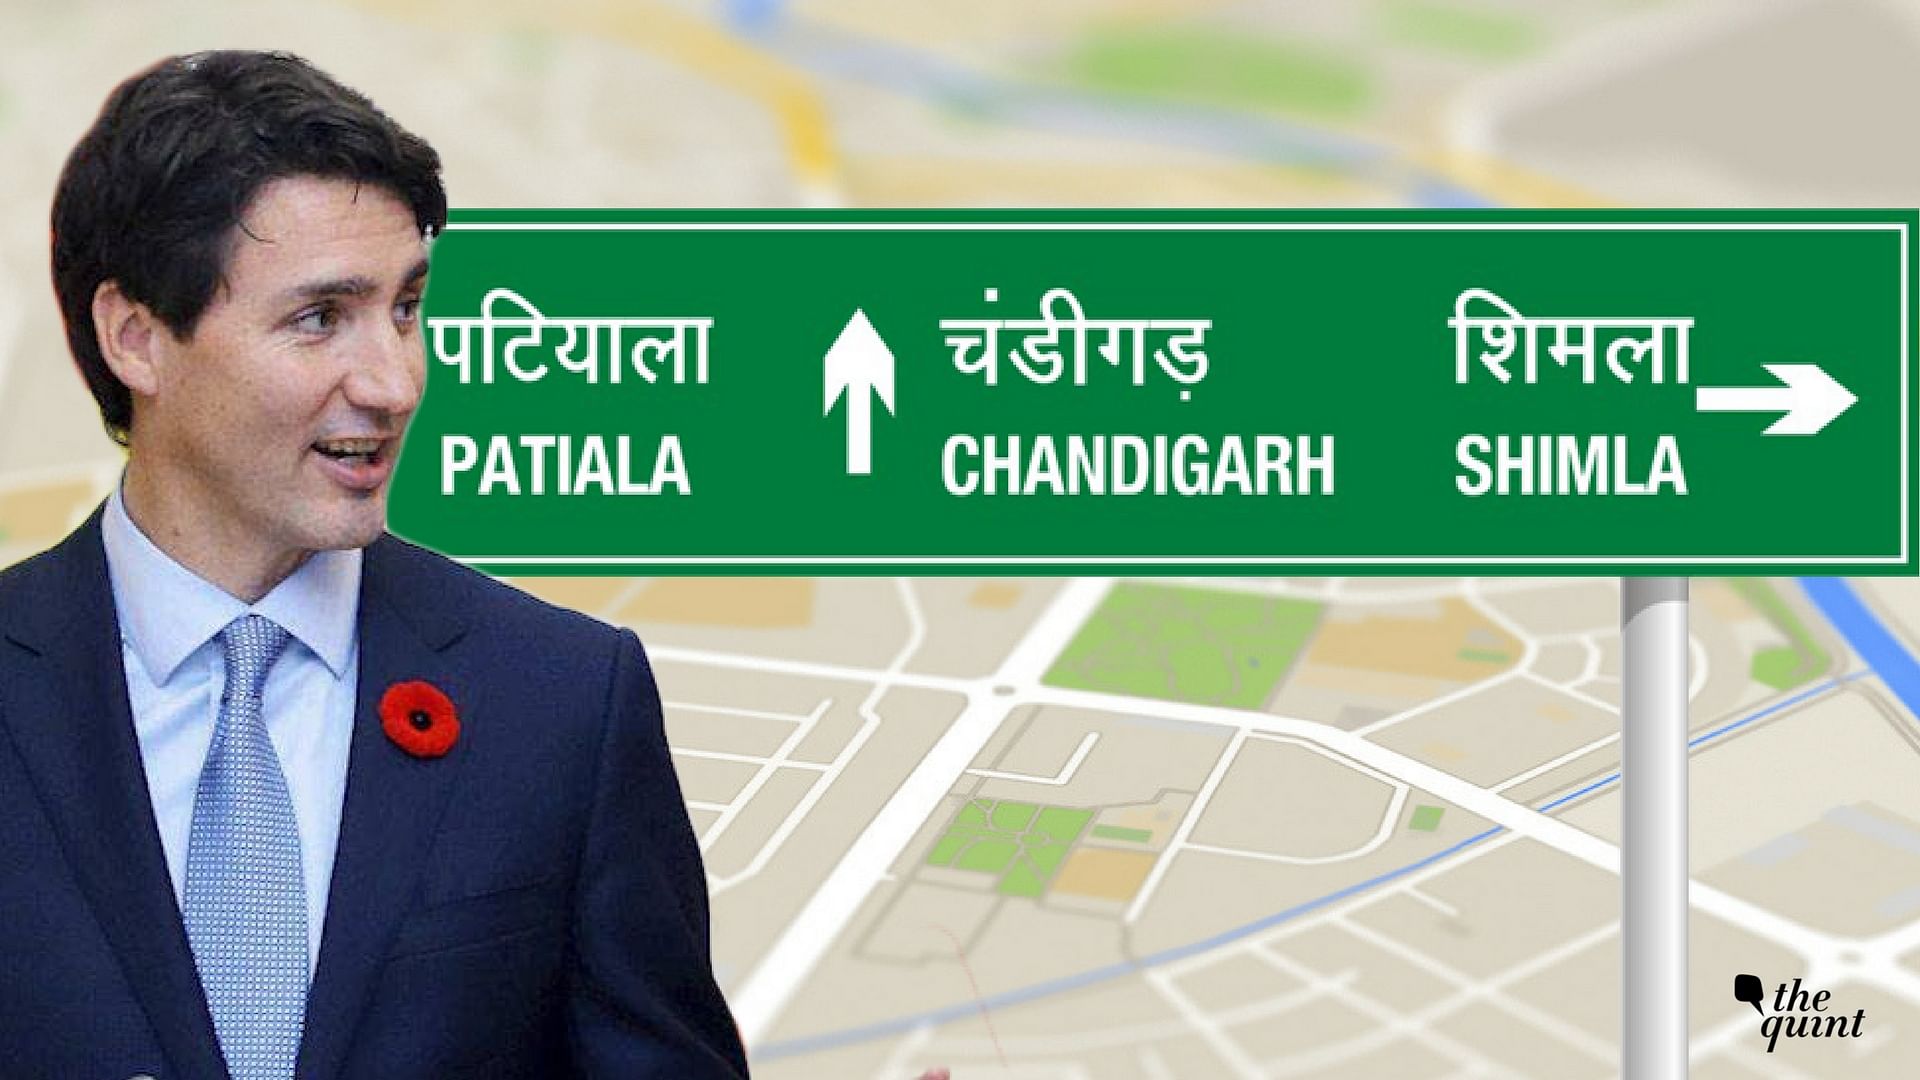 We think Justin Trudeau should visit these places in India.